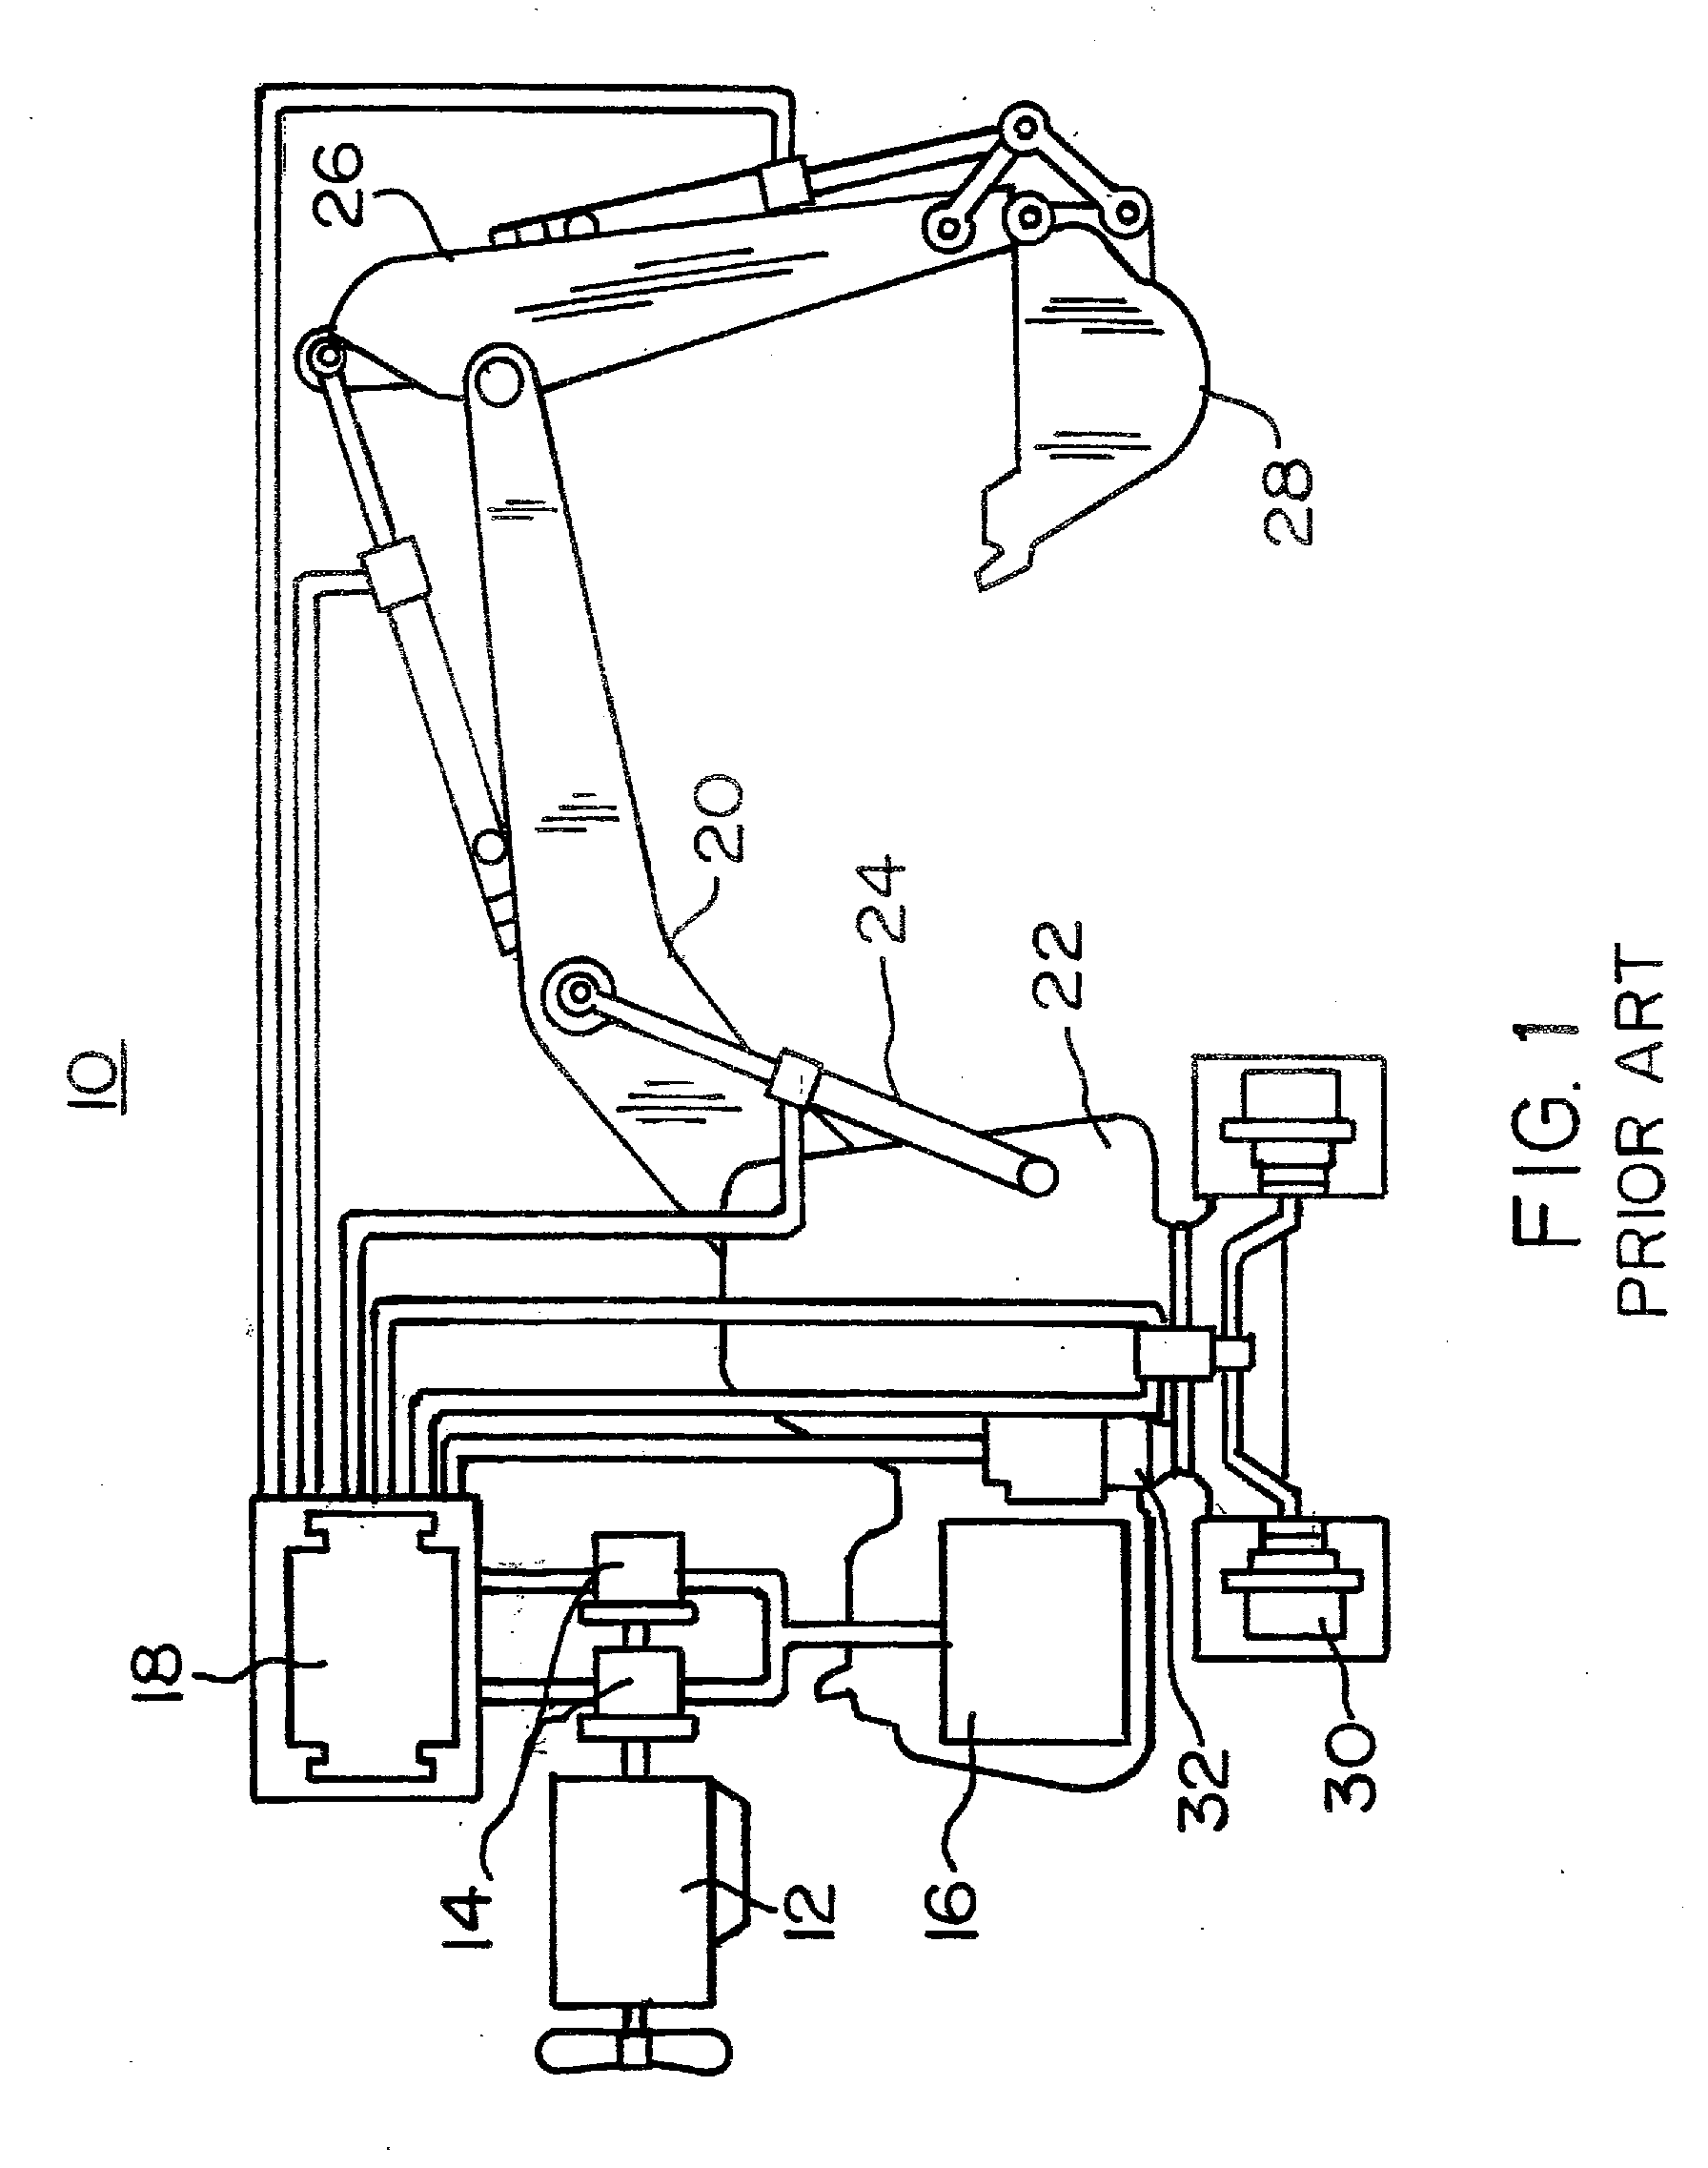 Universal Control Scheme For Mobile Hydraulic Equipment And Method For Achieving The Same